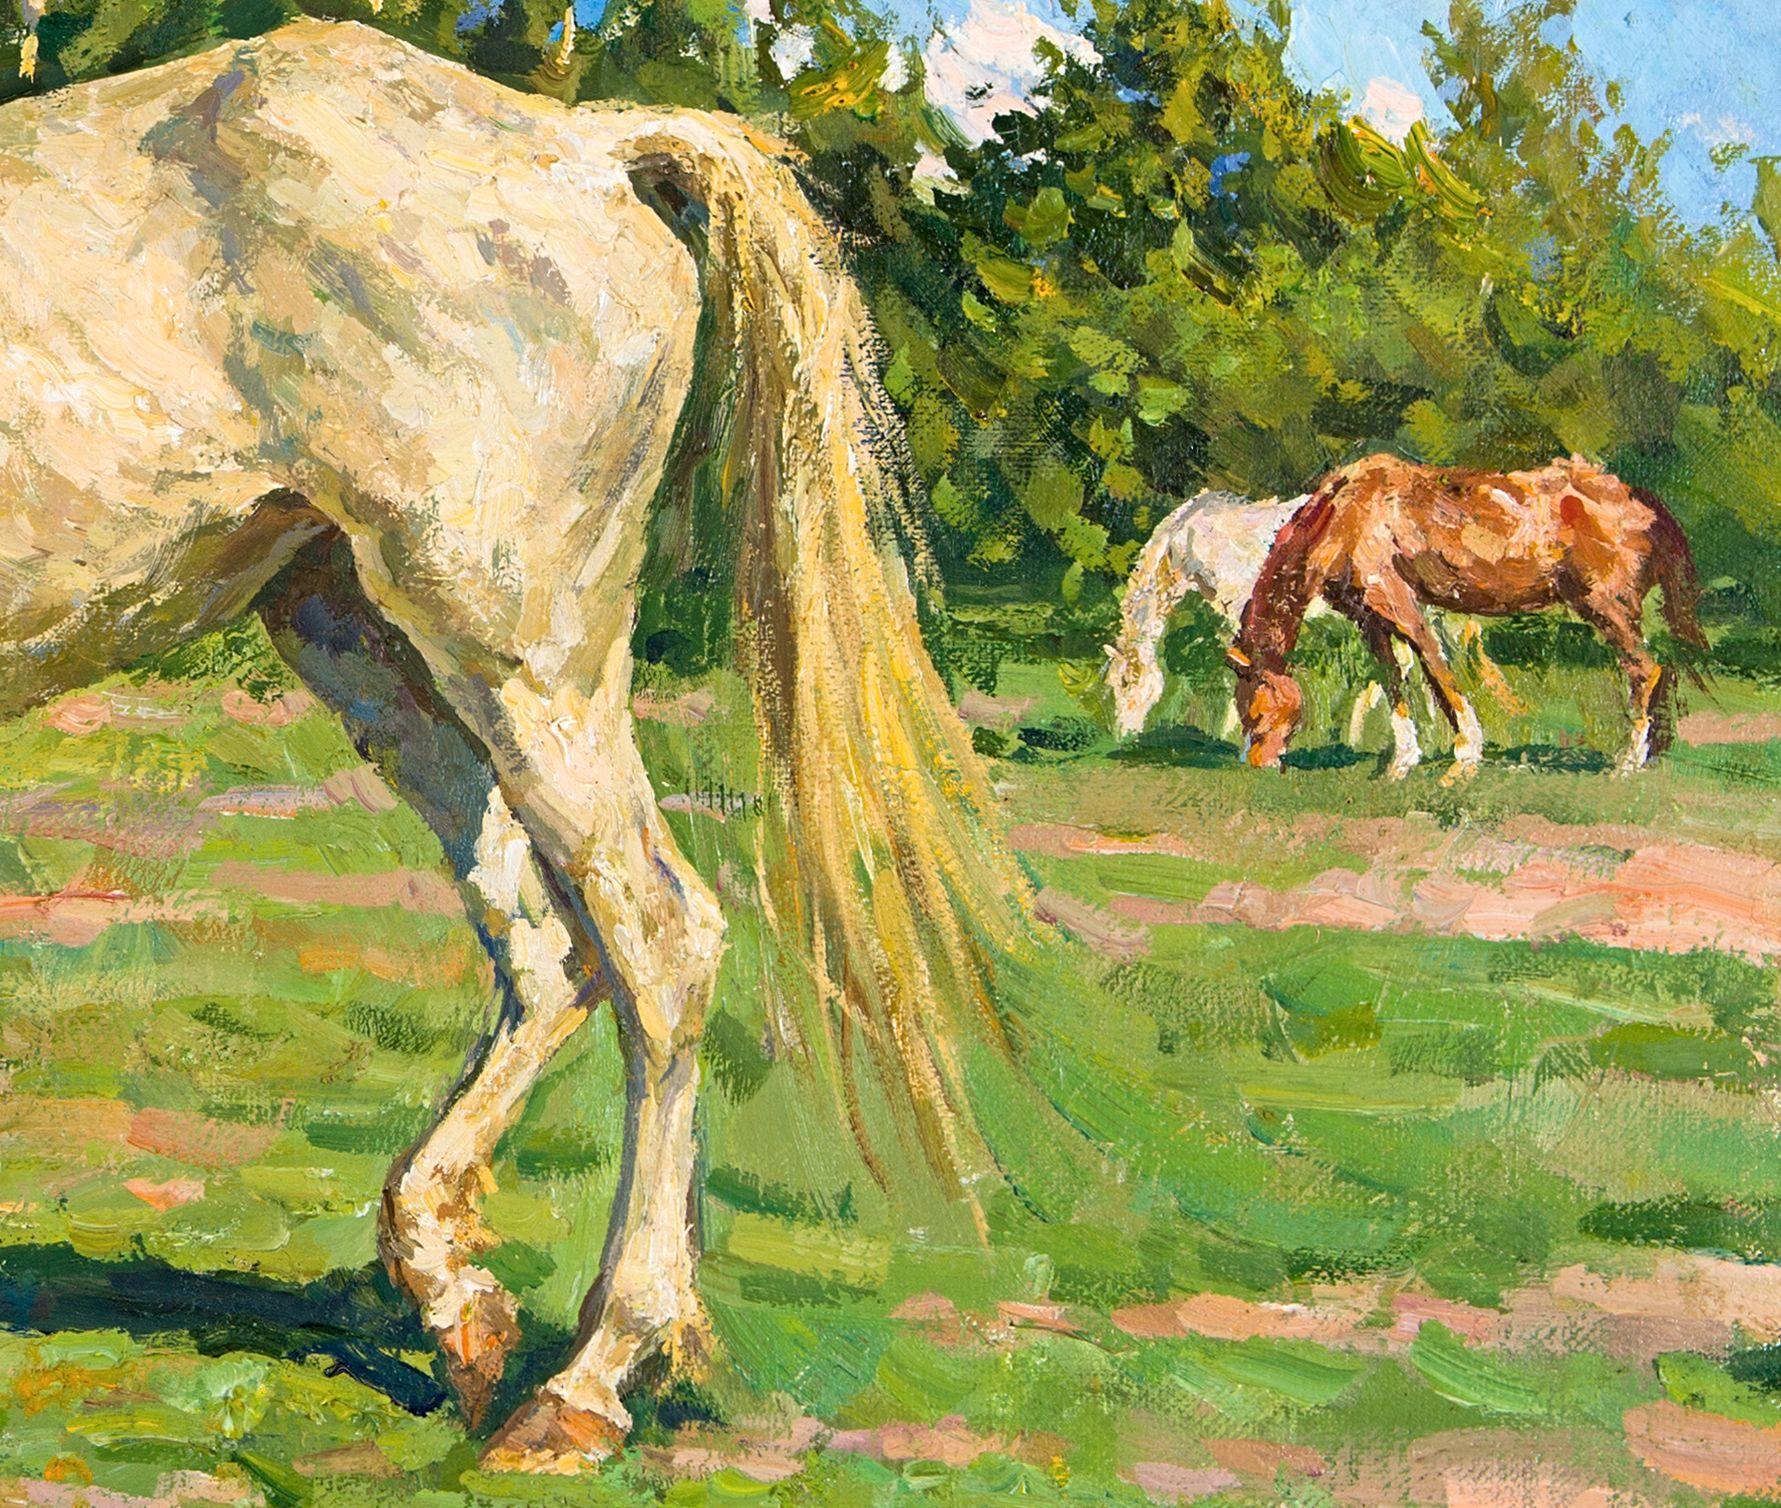 The Old Horse, Painting, Oil on Canvas 2